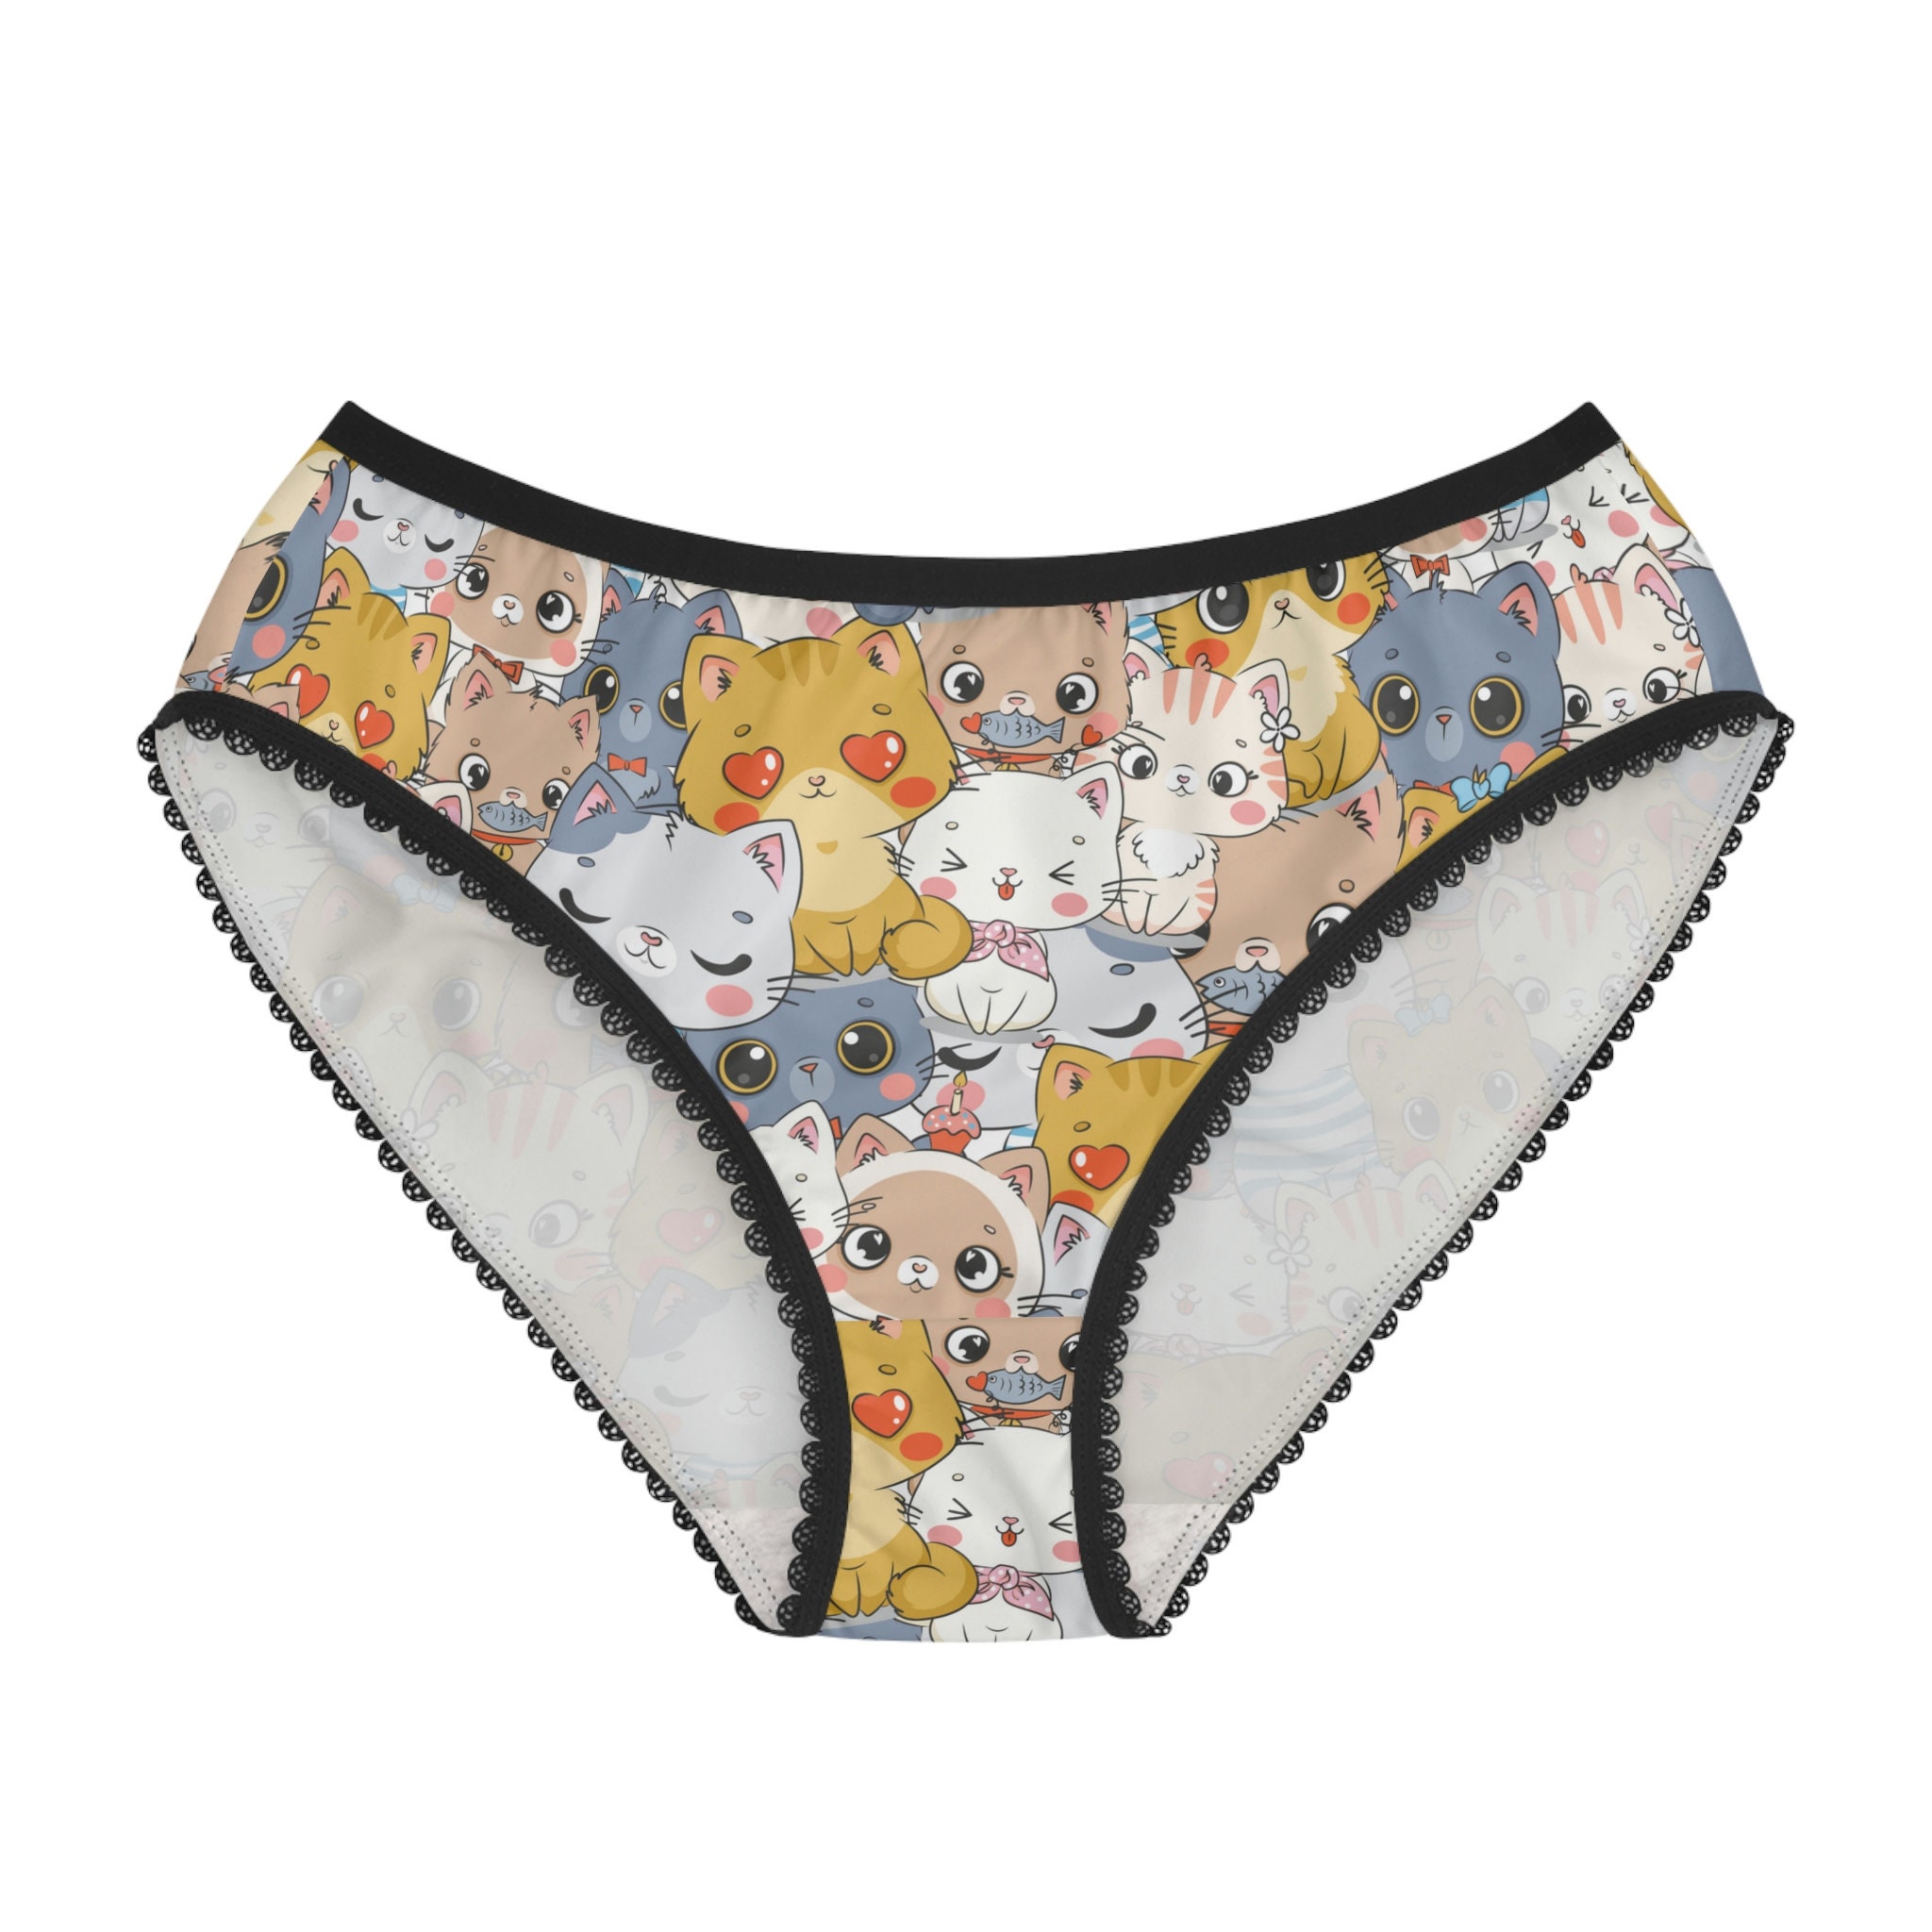 New cat lingerie sets from Japan are here to give you a purr-fect figure